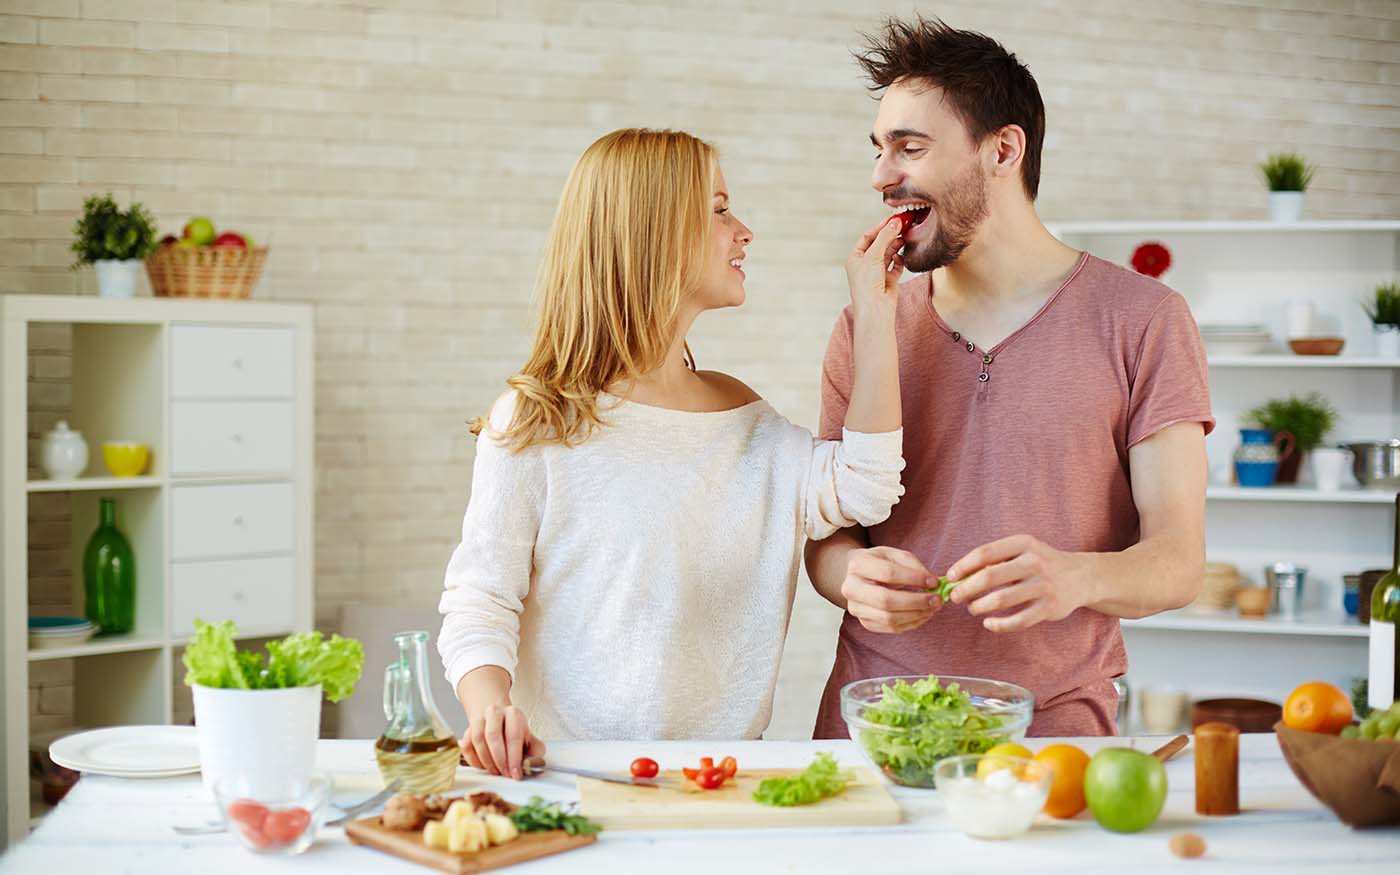 Couple playfully learning how to make healthy eating choices